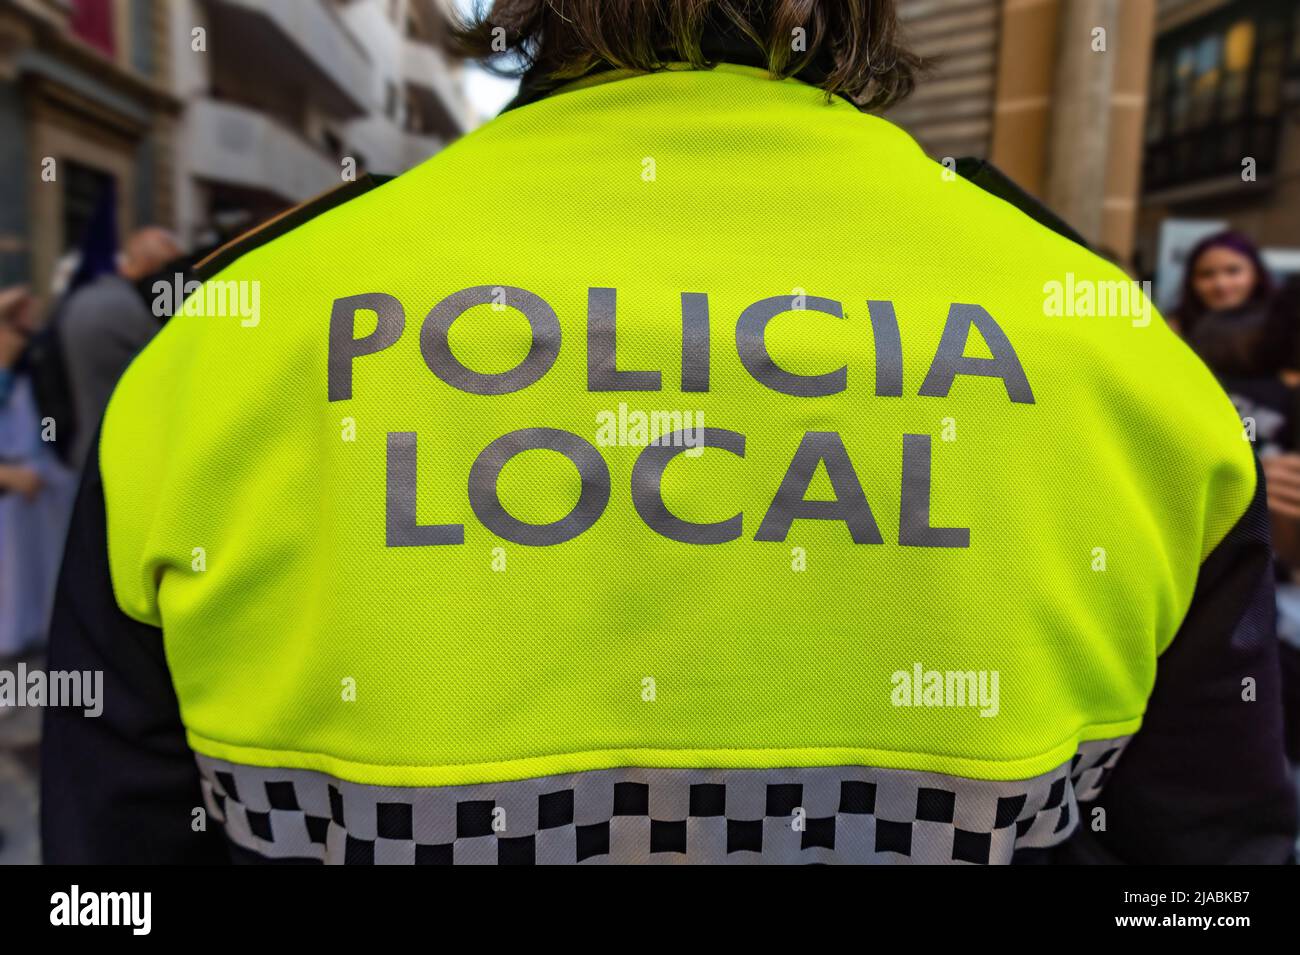 Back view of a police with the text in spanish 'Policia Local' that means local police maintaining the order in the streets Stock Photo